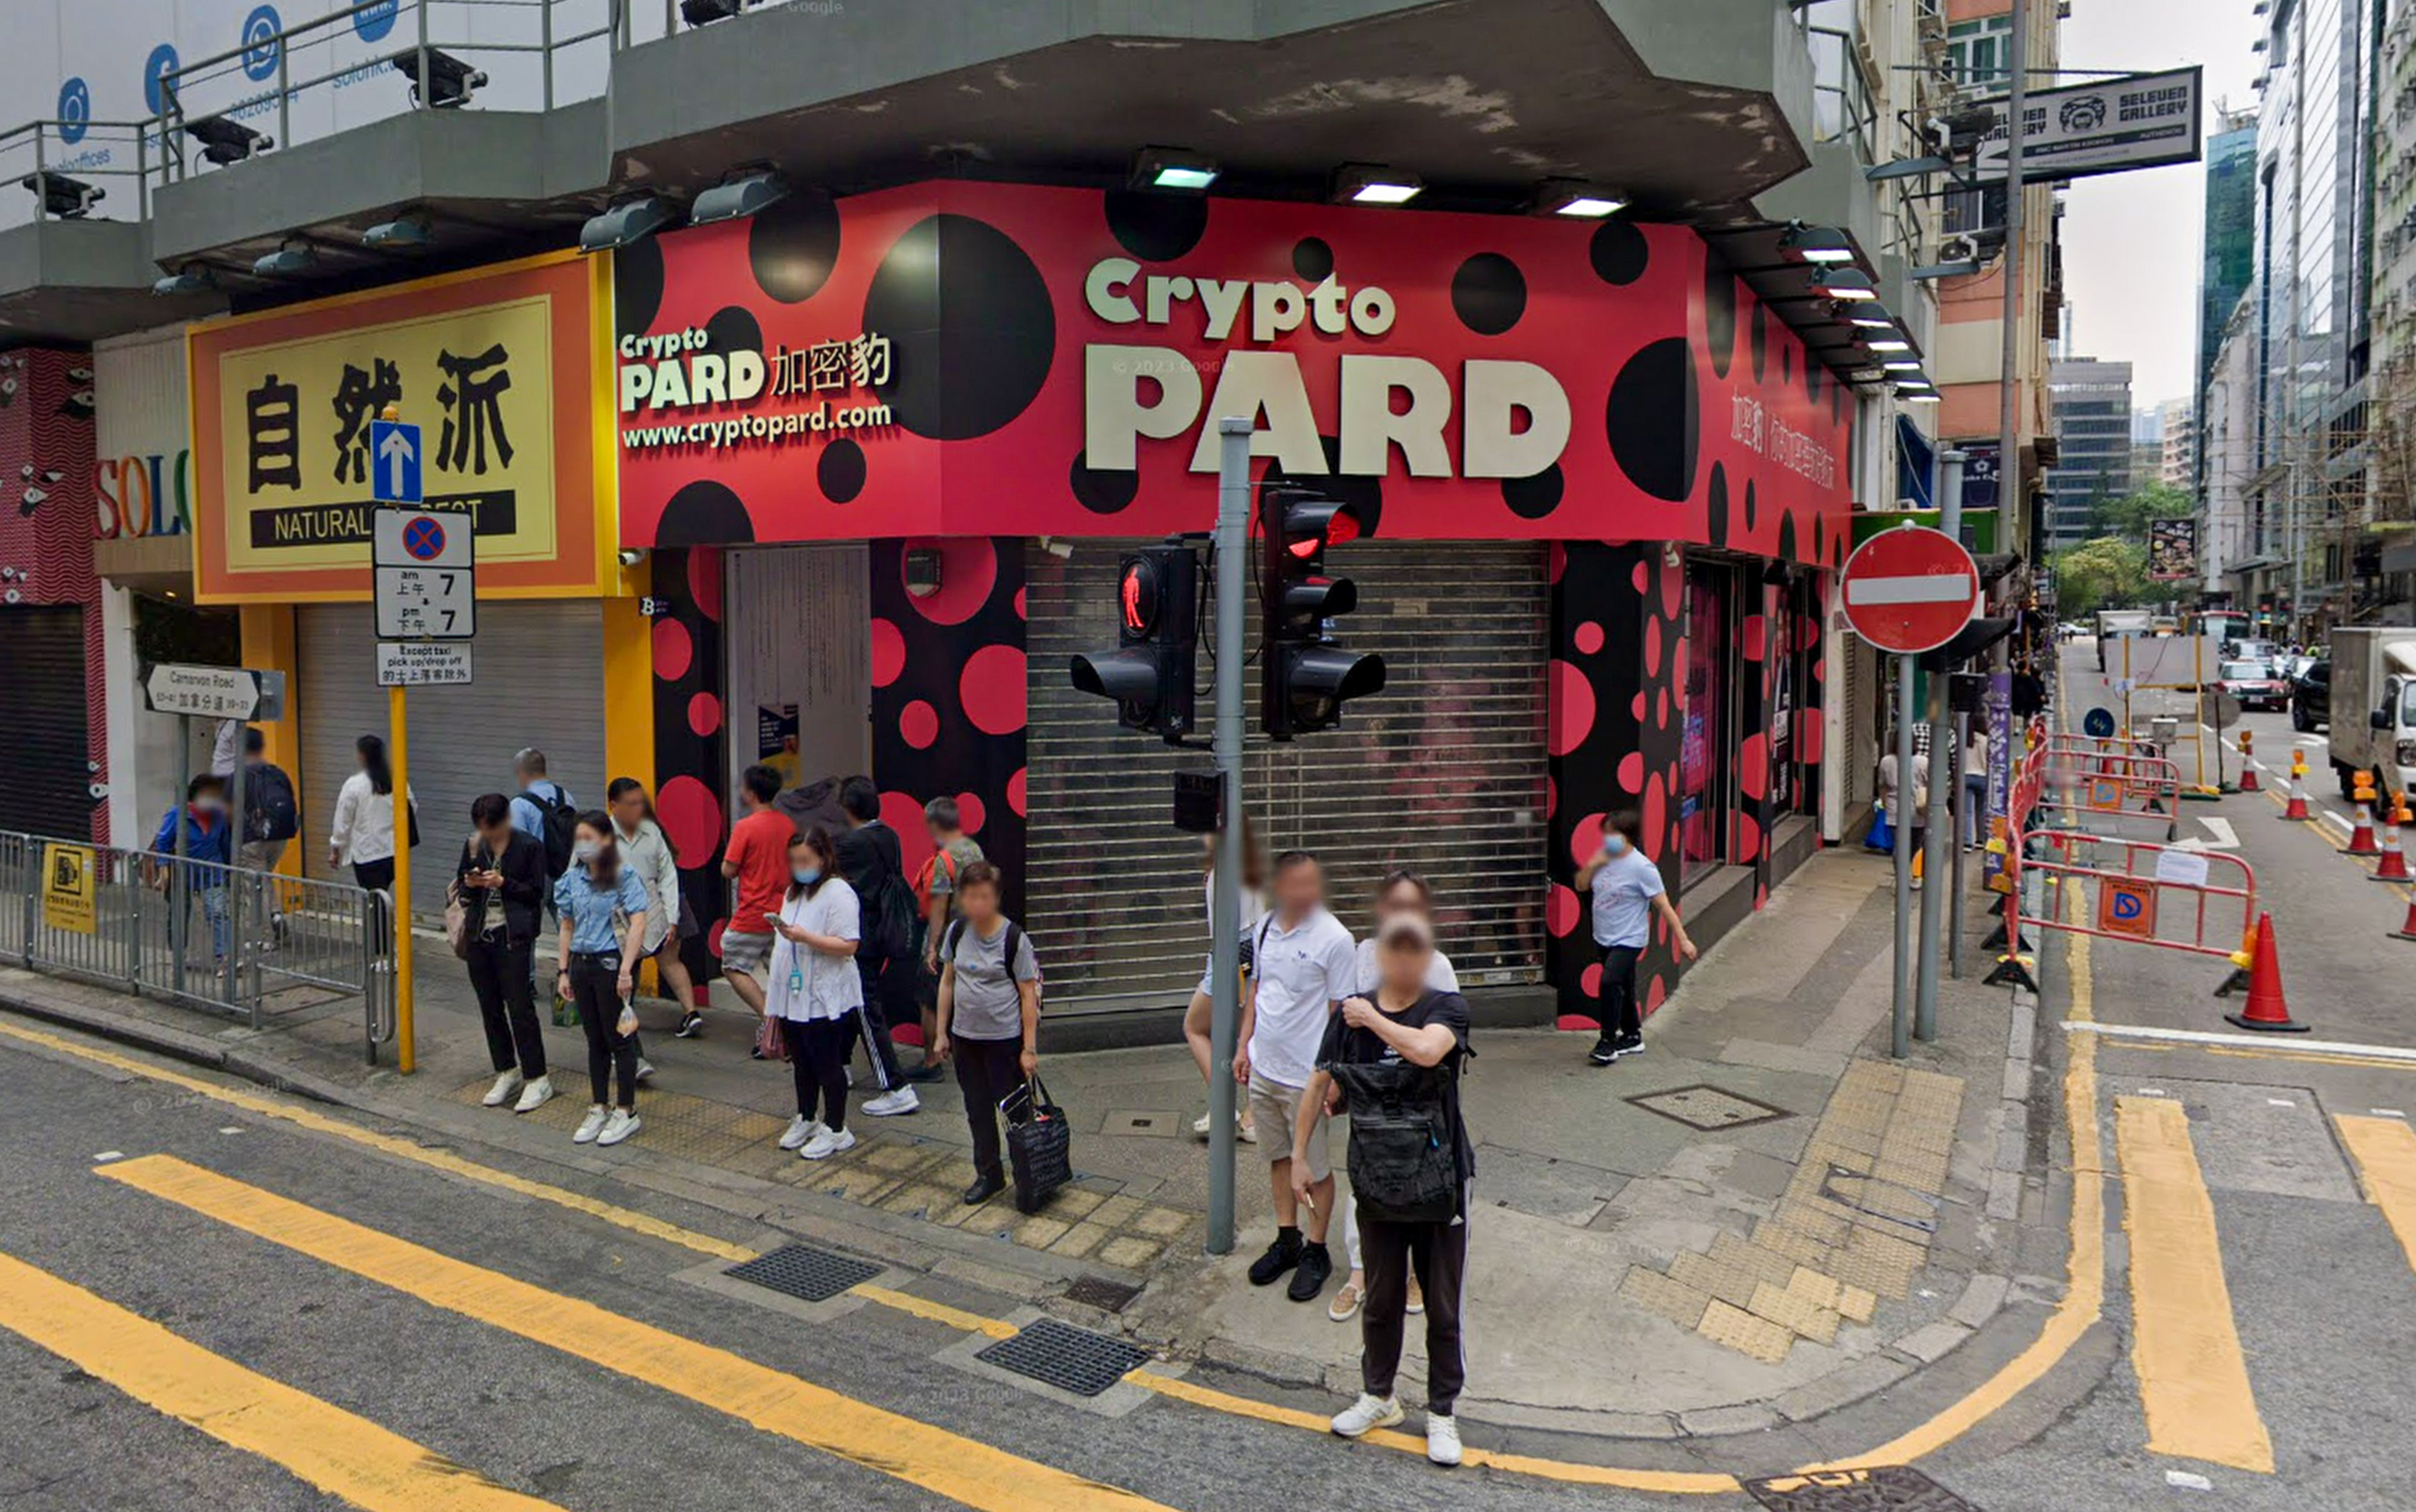 The CEO and an ex-director of CryptoPARD were among those arrested on Thursday, a source said. Photo: Handout